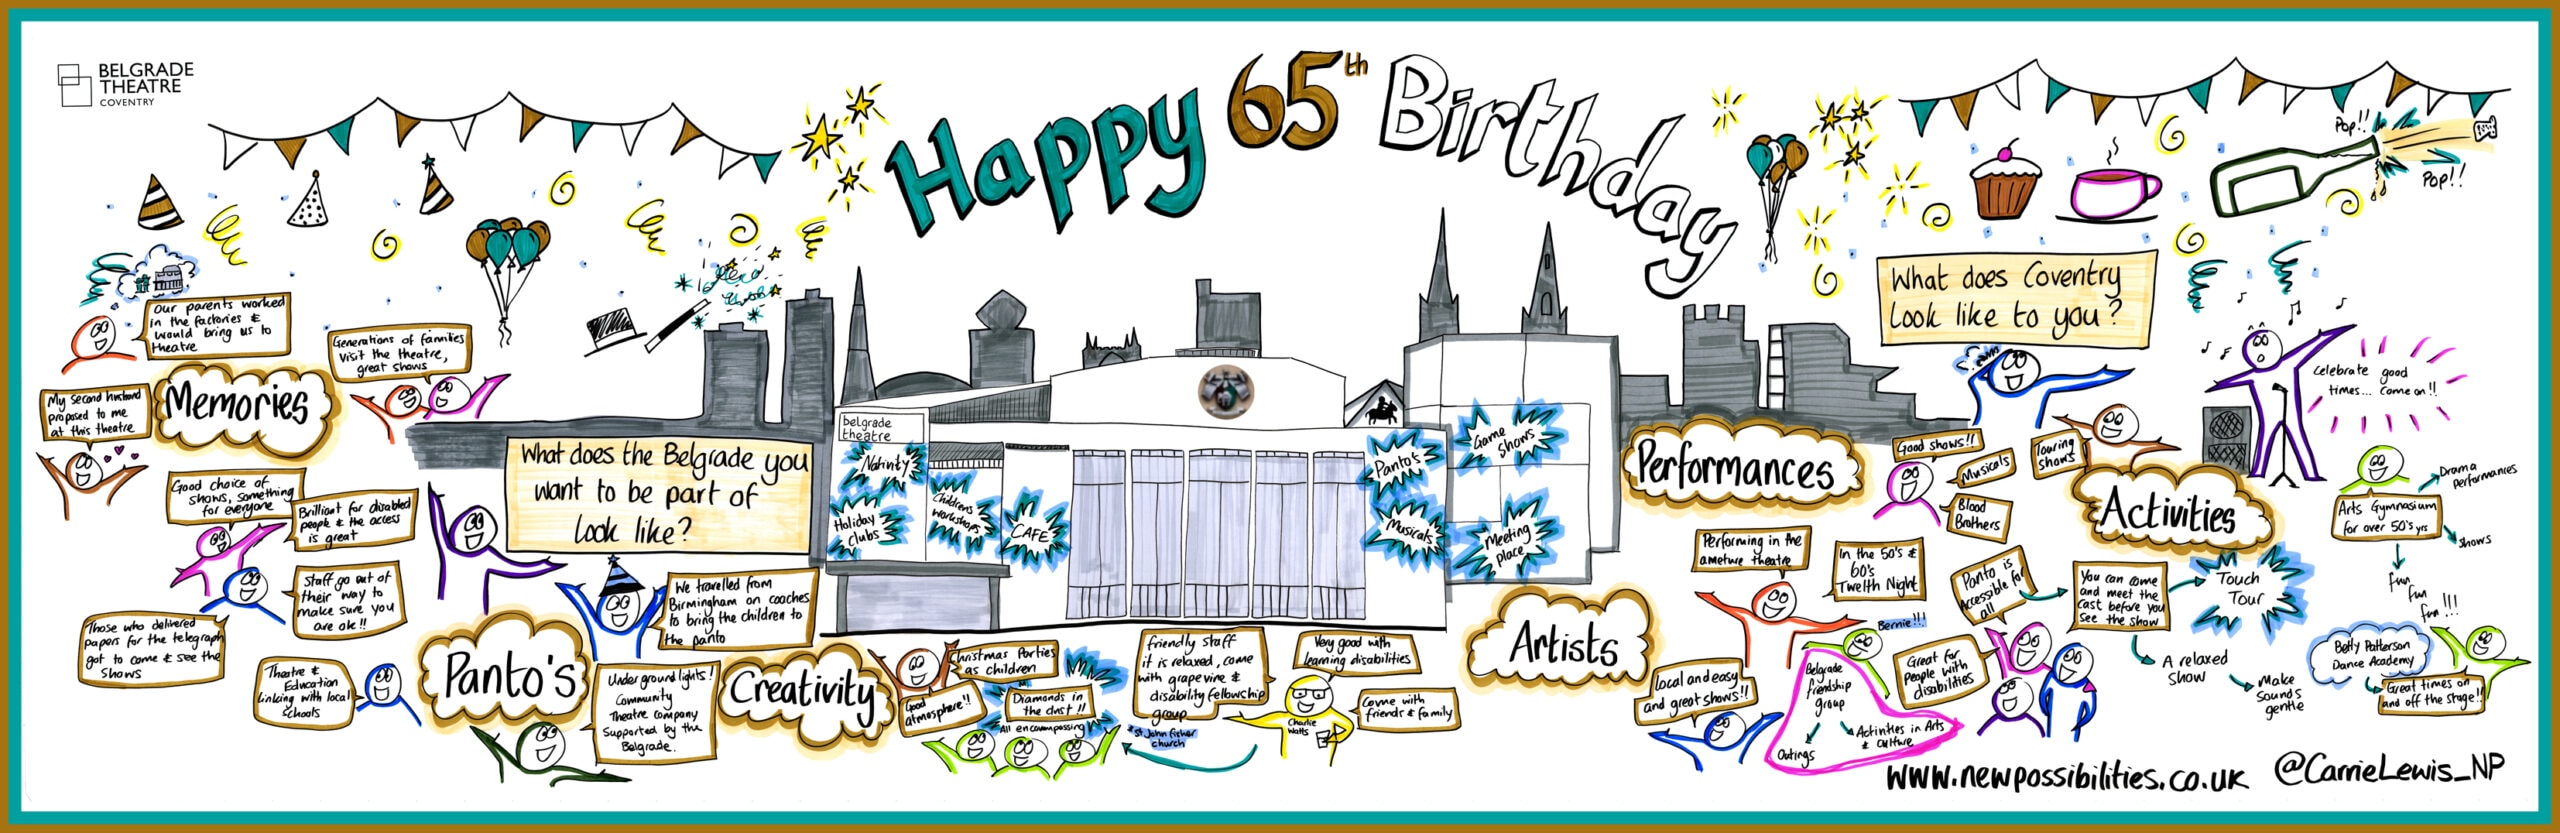 Drawing created live during the birthday event by local artist Carrie Lewis.